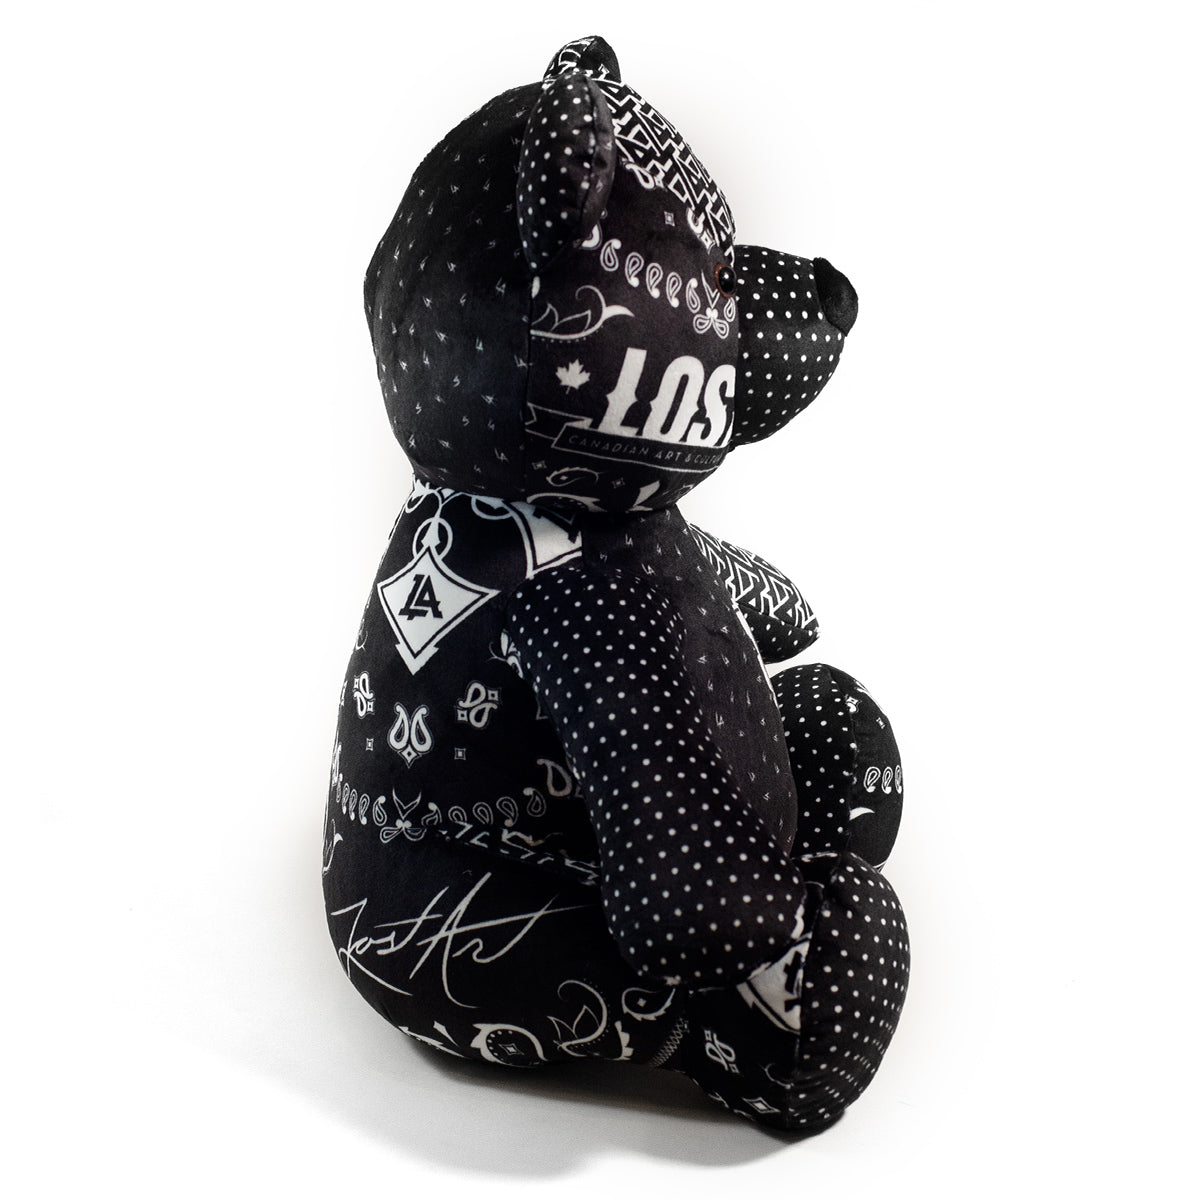 Lost Art Canada - black white patterned teddy bear right side view